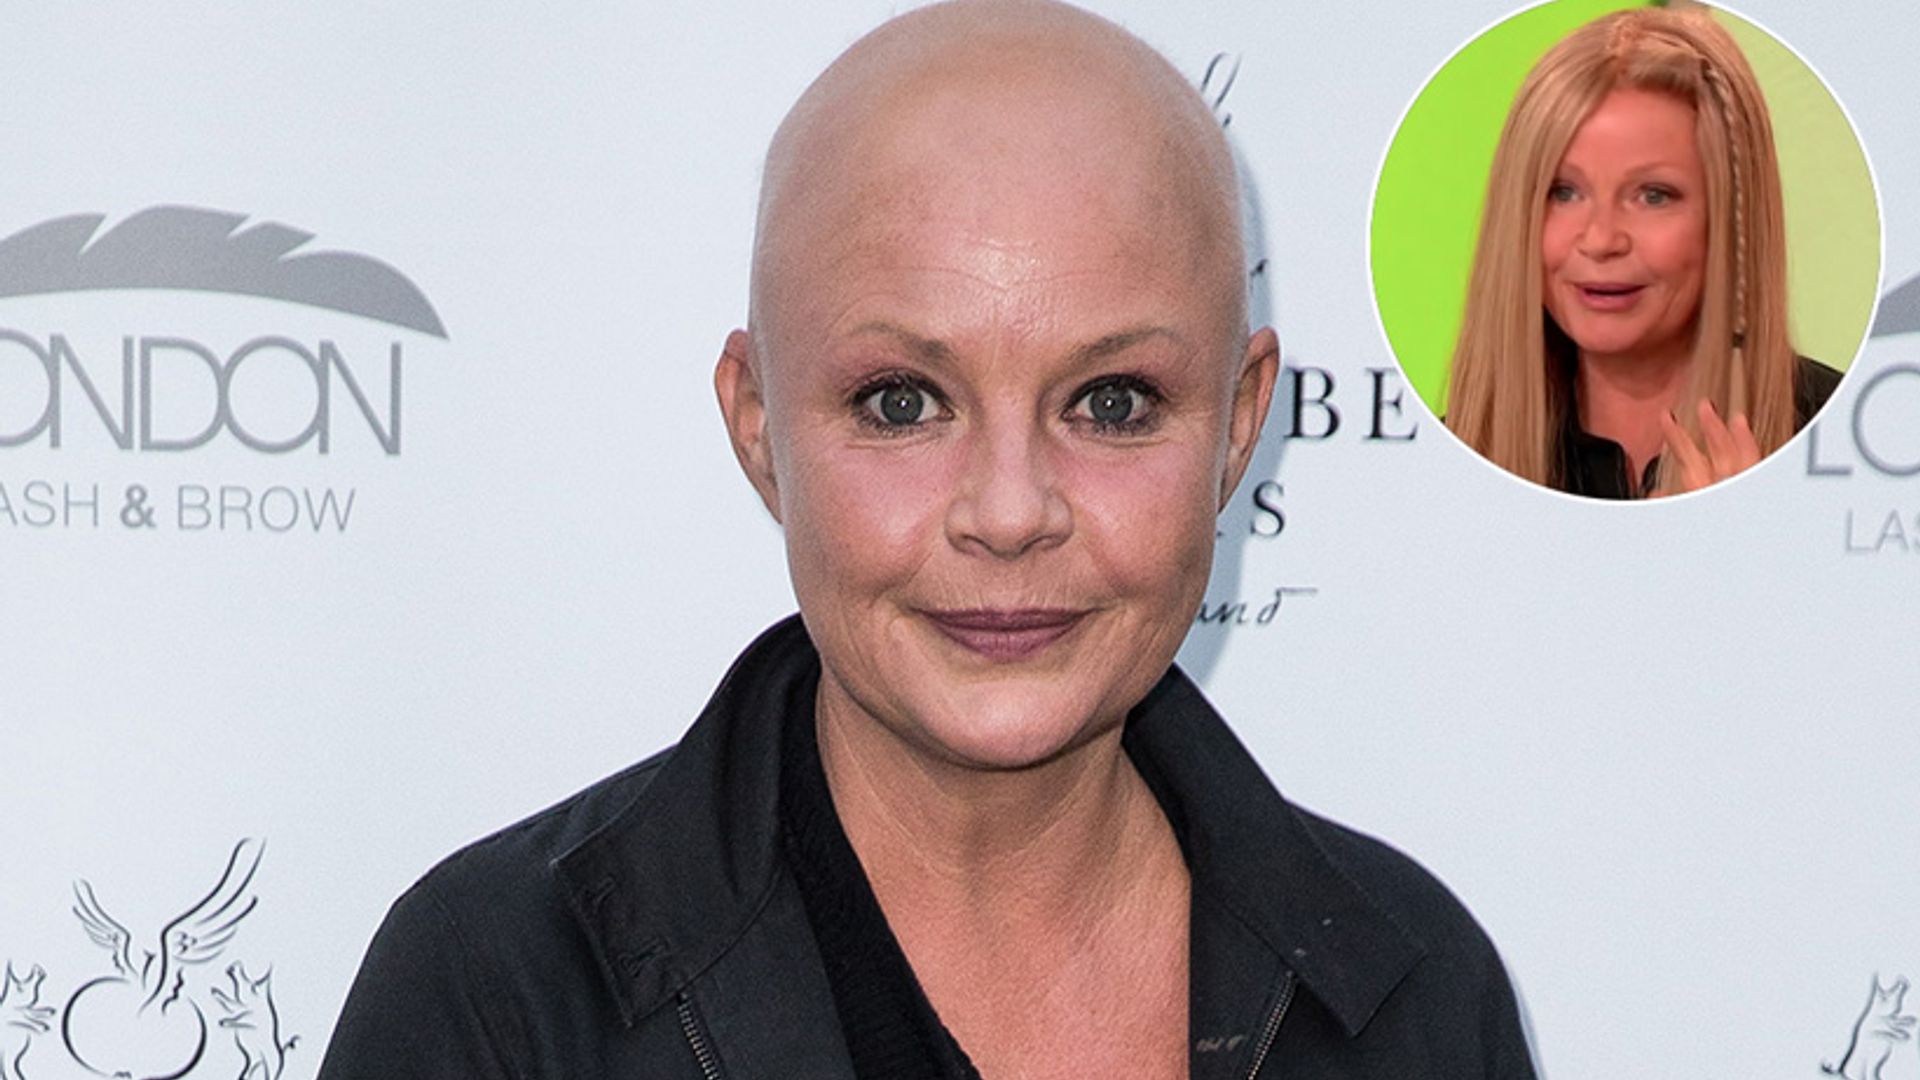 Gail Porter shows off long locks in incredible transformation